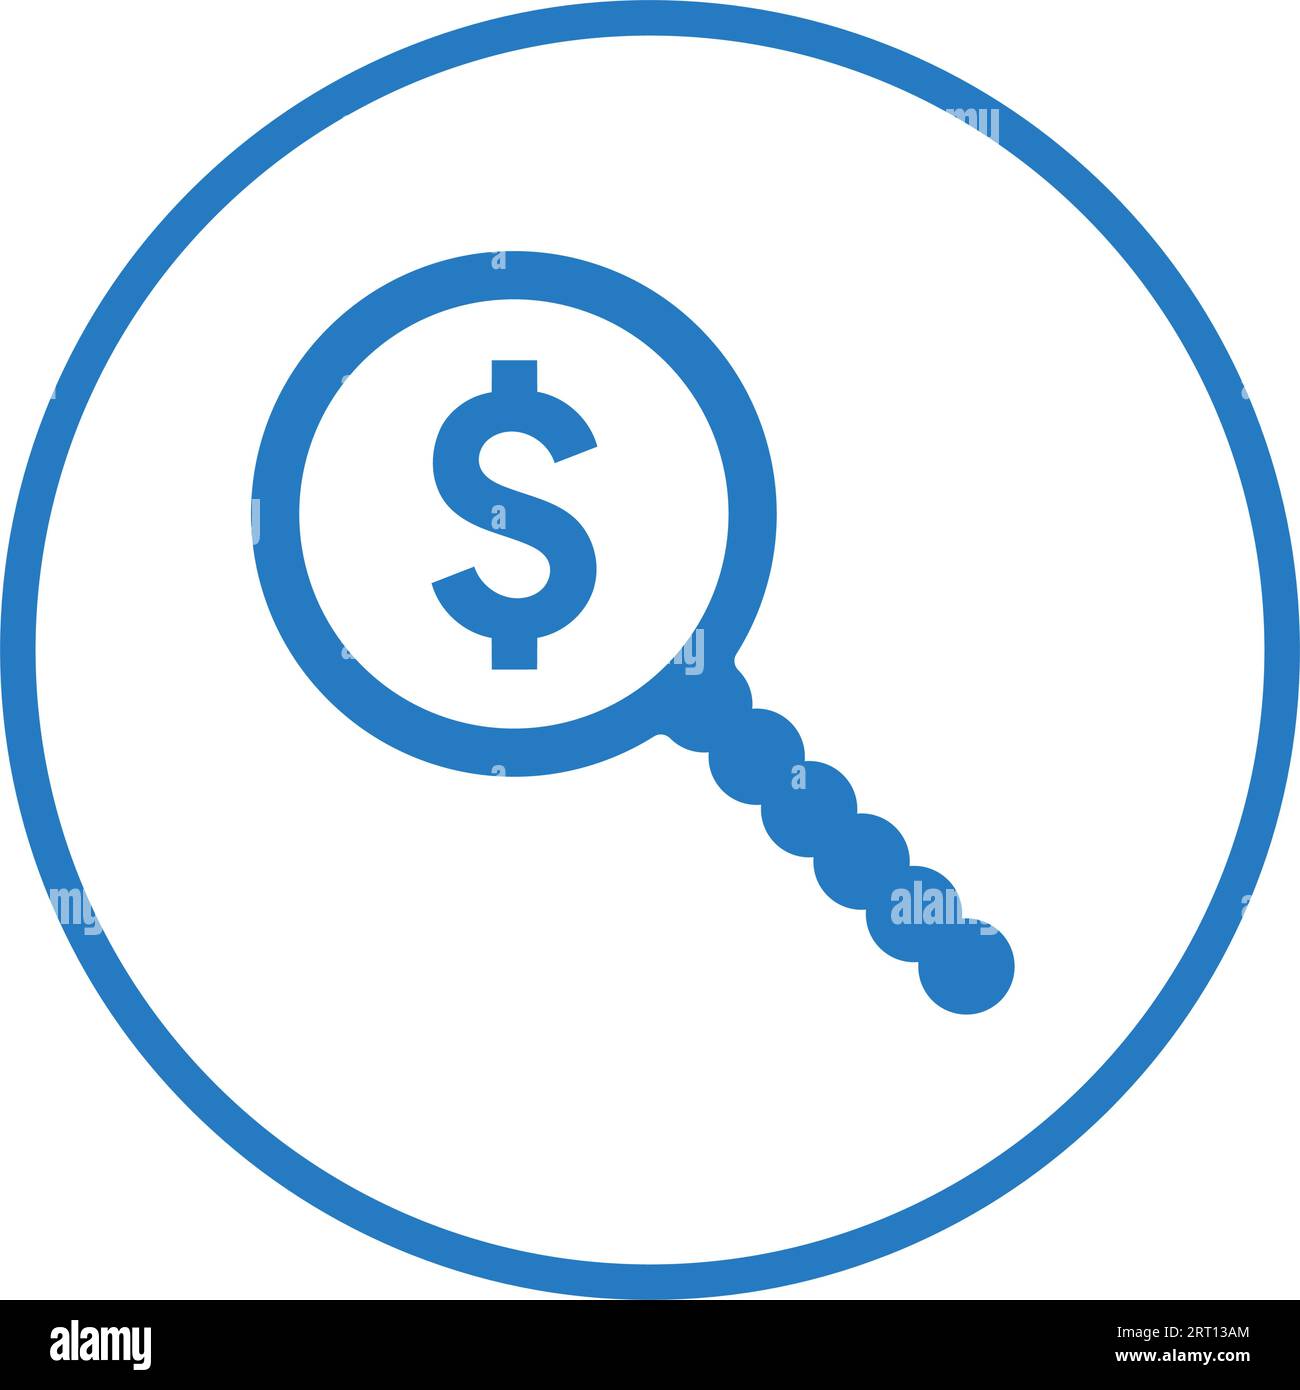 Money Search icon. Use for designing and developing websites, commercial purposes, print media, web or any type of design task. Stock Vector